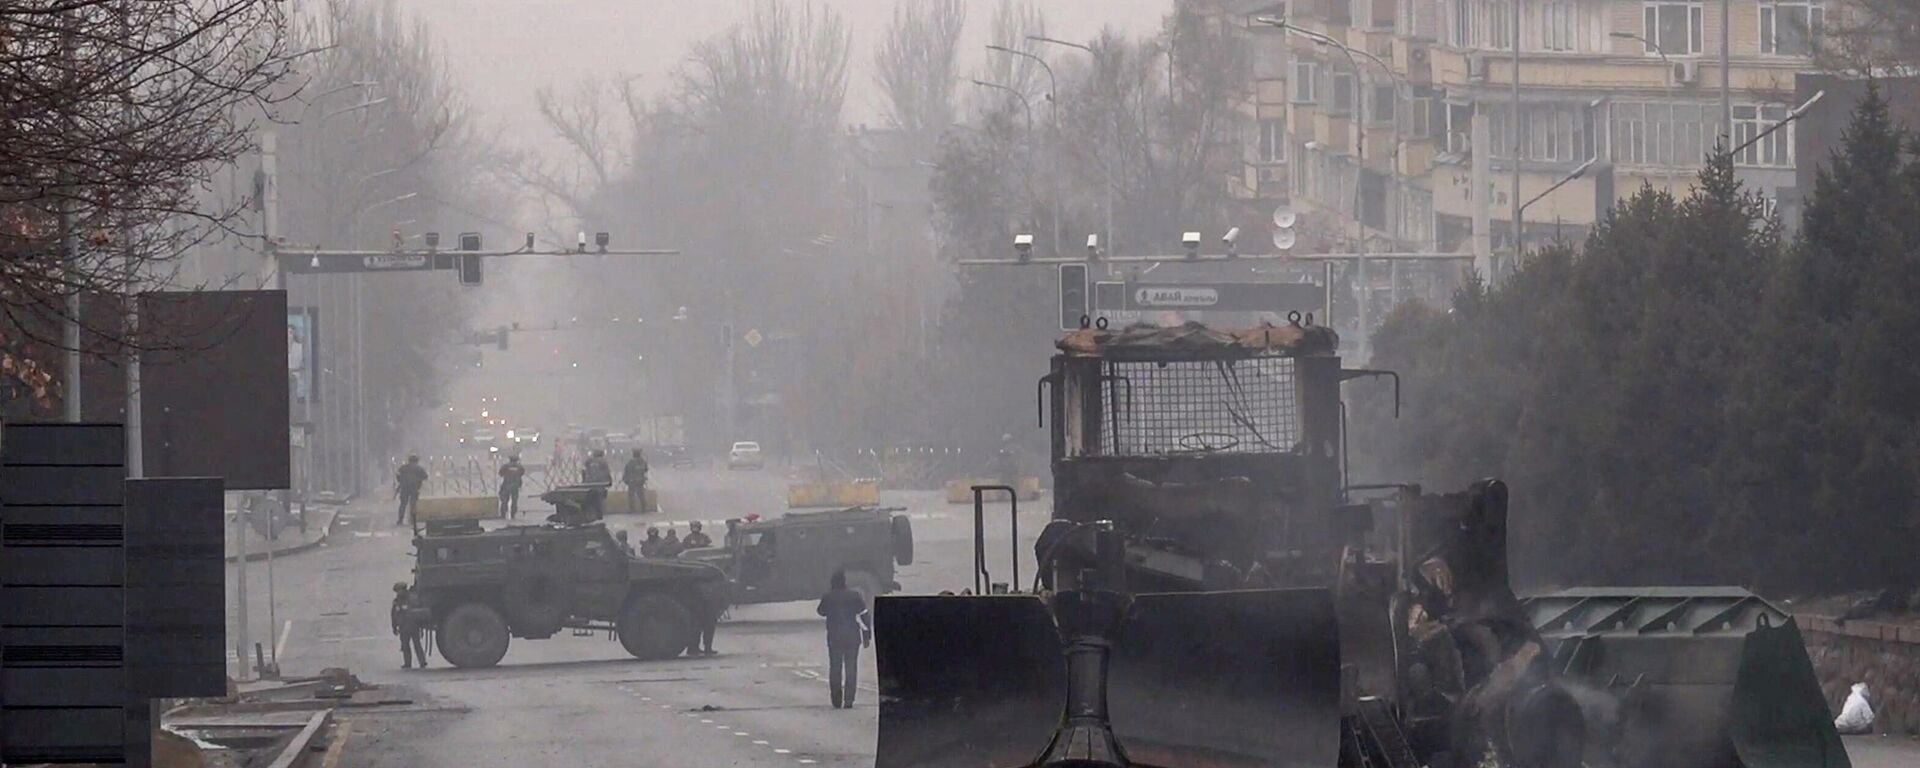 Servicemen and their military vehicles block a street in central Almaty on January 7, 2022, after violence that erupted following protests over hikes in fuel prices - Sputnik International, 1920, 09.01.2022